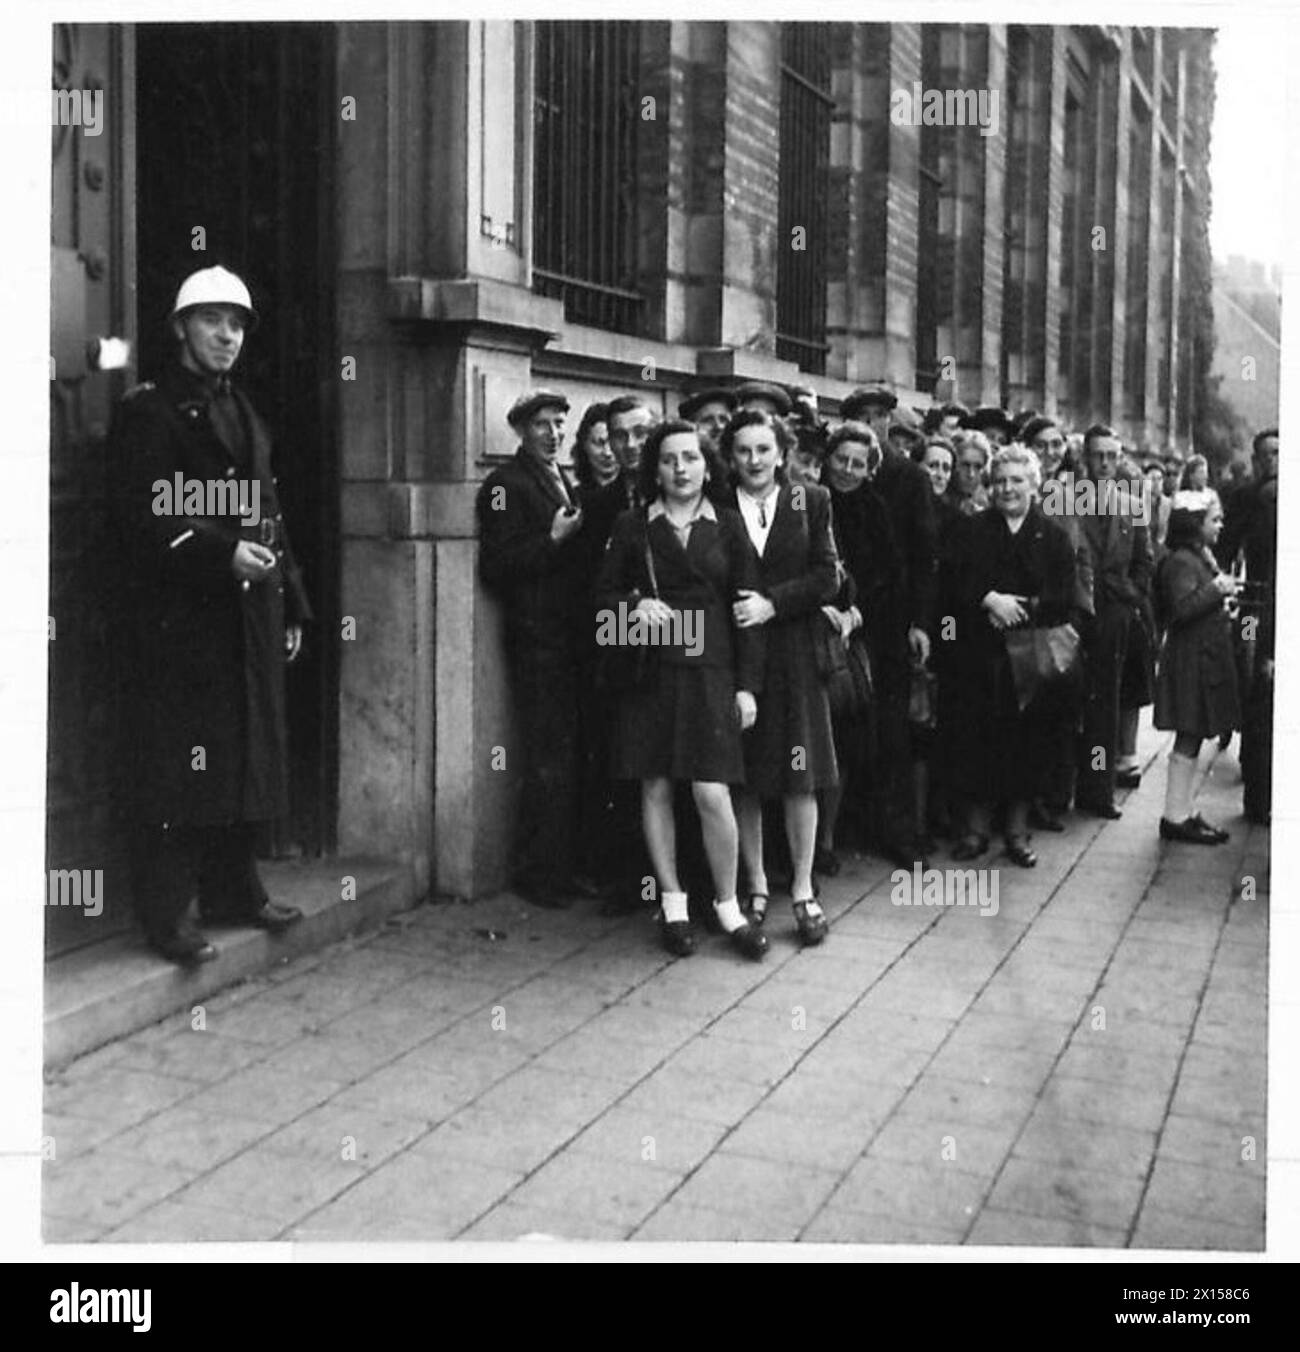 LIFE IN LIBERATED BELGIUM - To avoid inflation: The Germans flooded Belgium, as they did in other countries, with money.. To avoid a financial catastrophe, all the money circulated by the Germans is being withdrawn by the Belgian Government to enable them to assess the amount of supurious coinage. Here are civilians queuing outside a bank to receive new issue notes in exchange for the old British Army, 21st Army Group Stock Photo